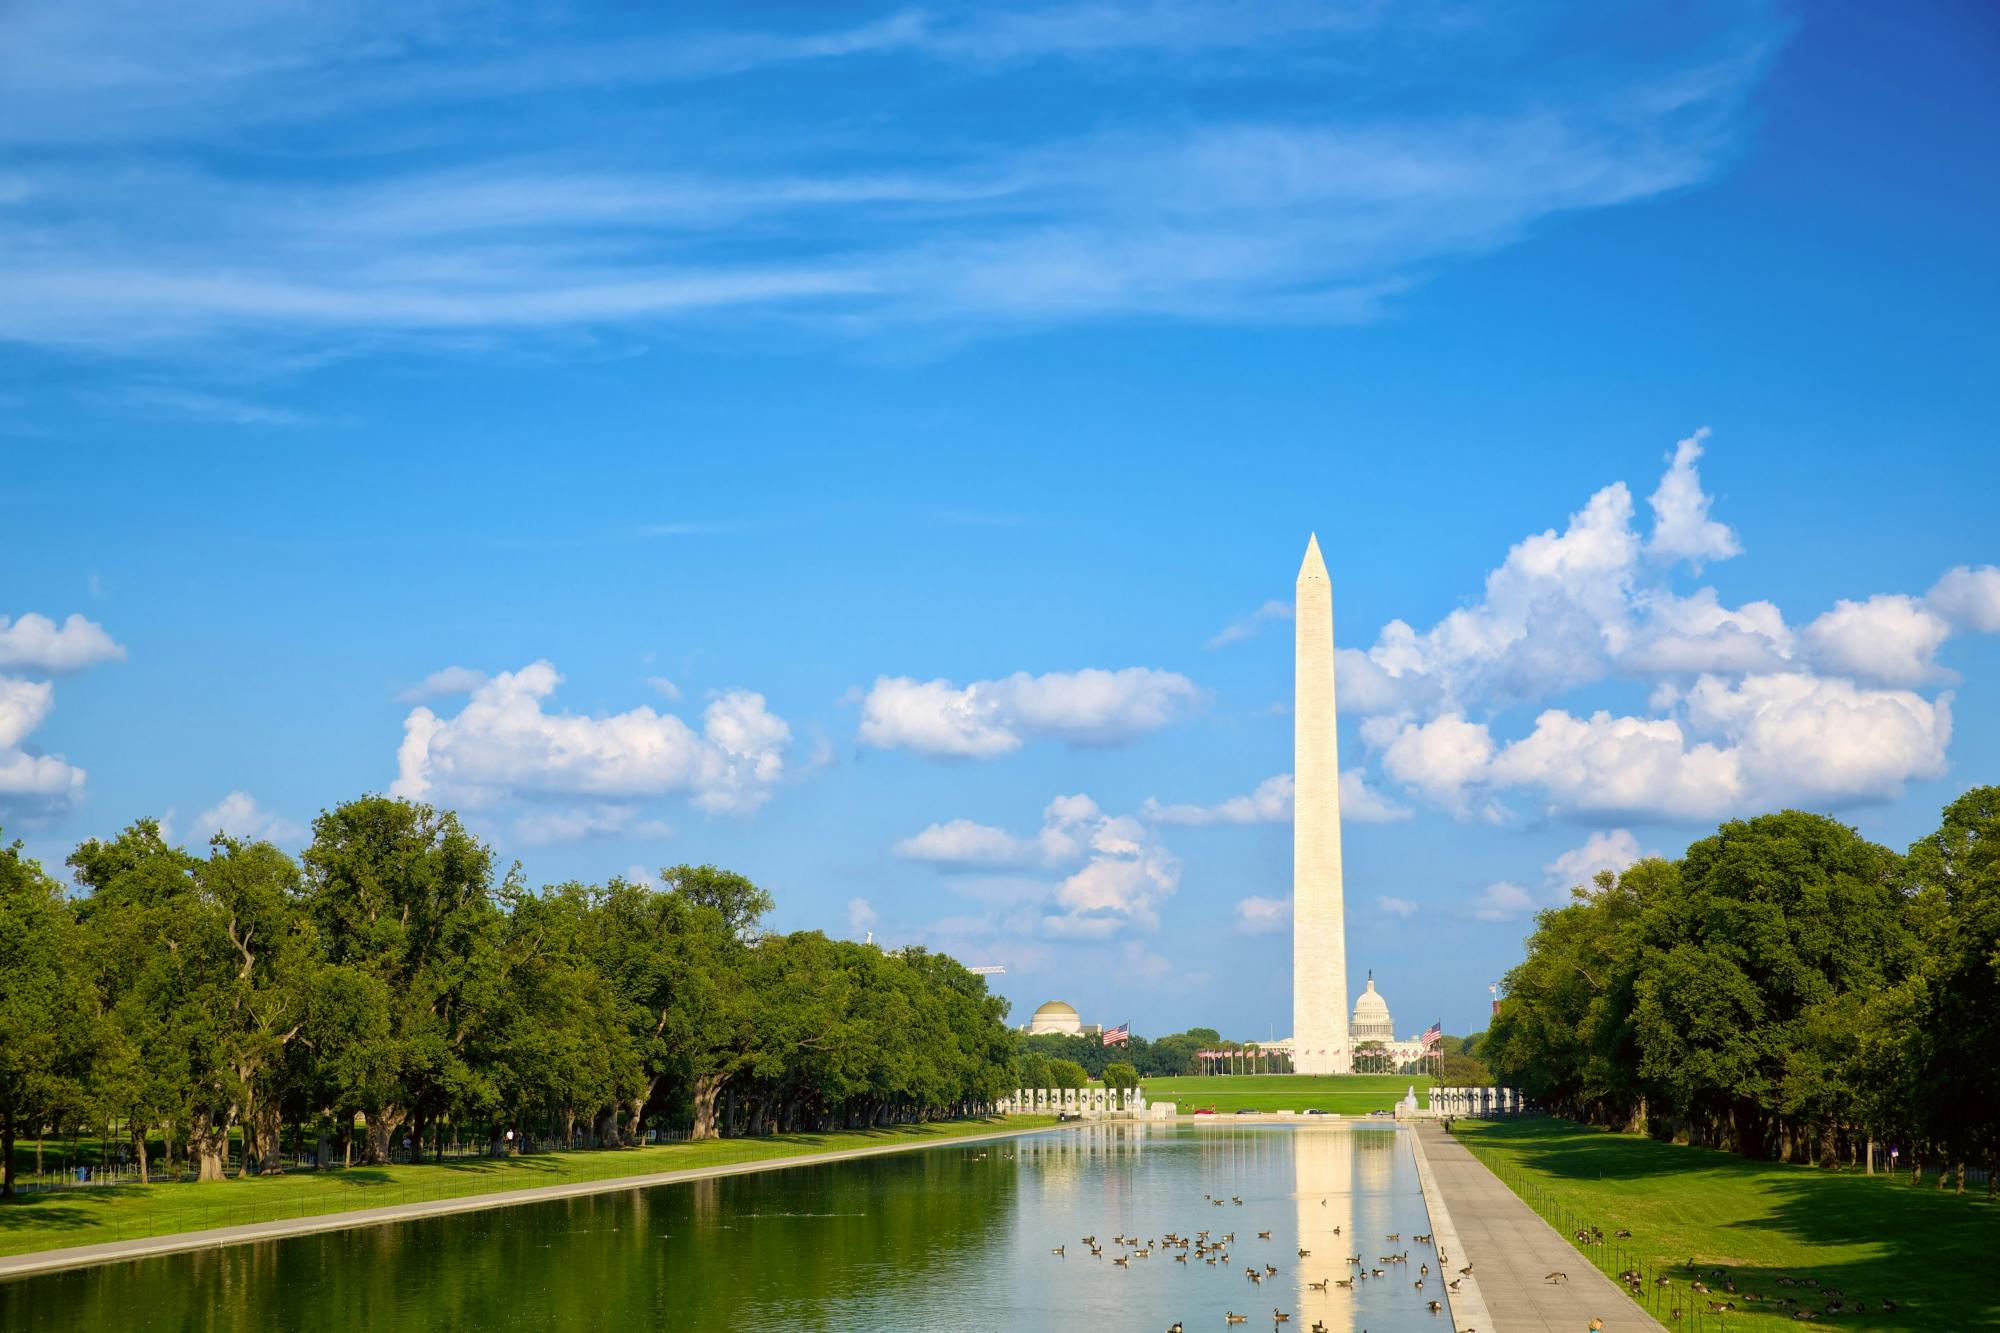 Tour Washington DC National Mall with an exploration game app Musement